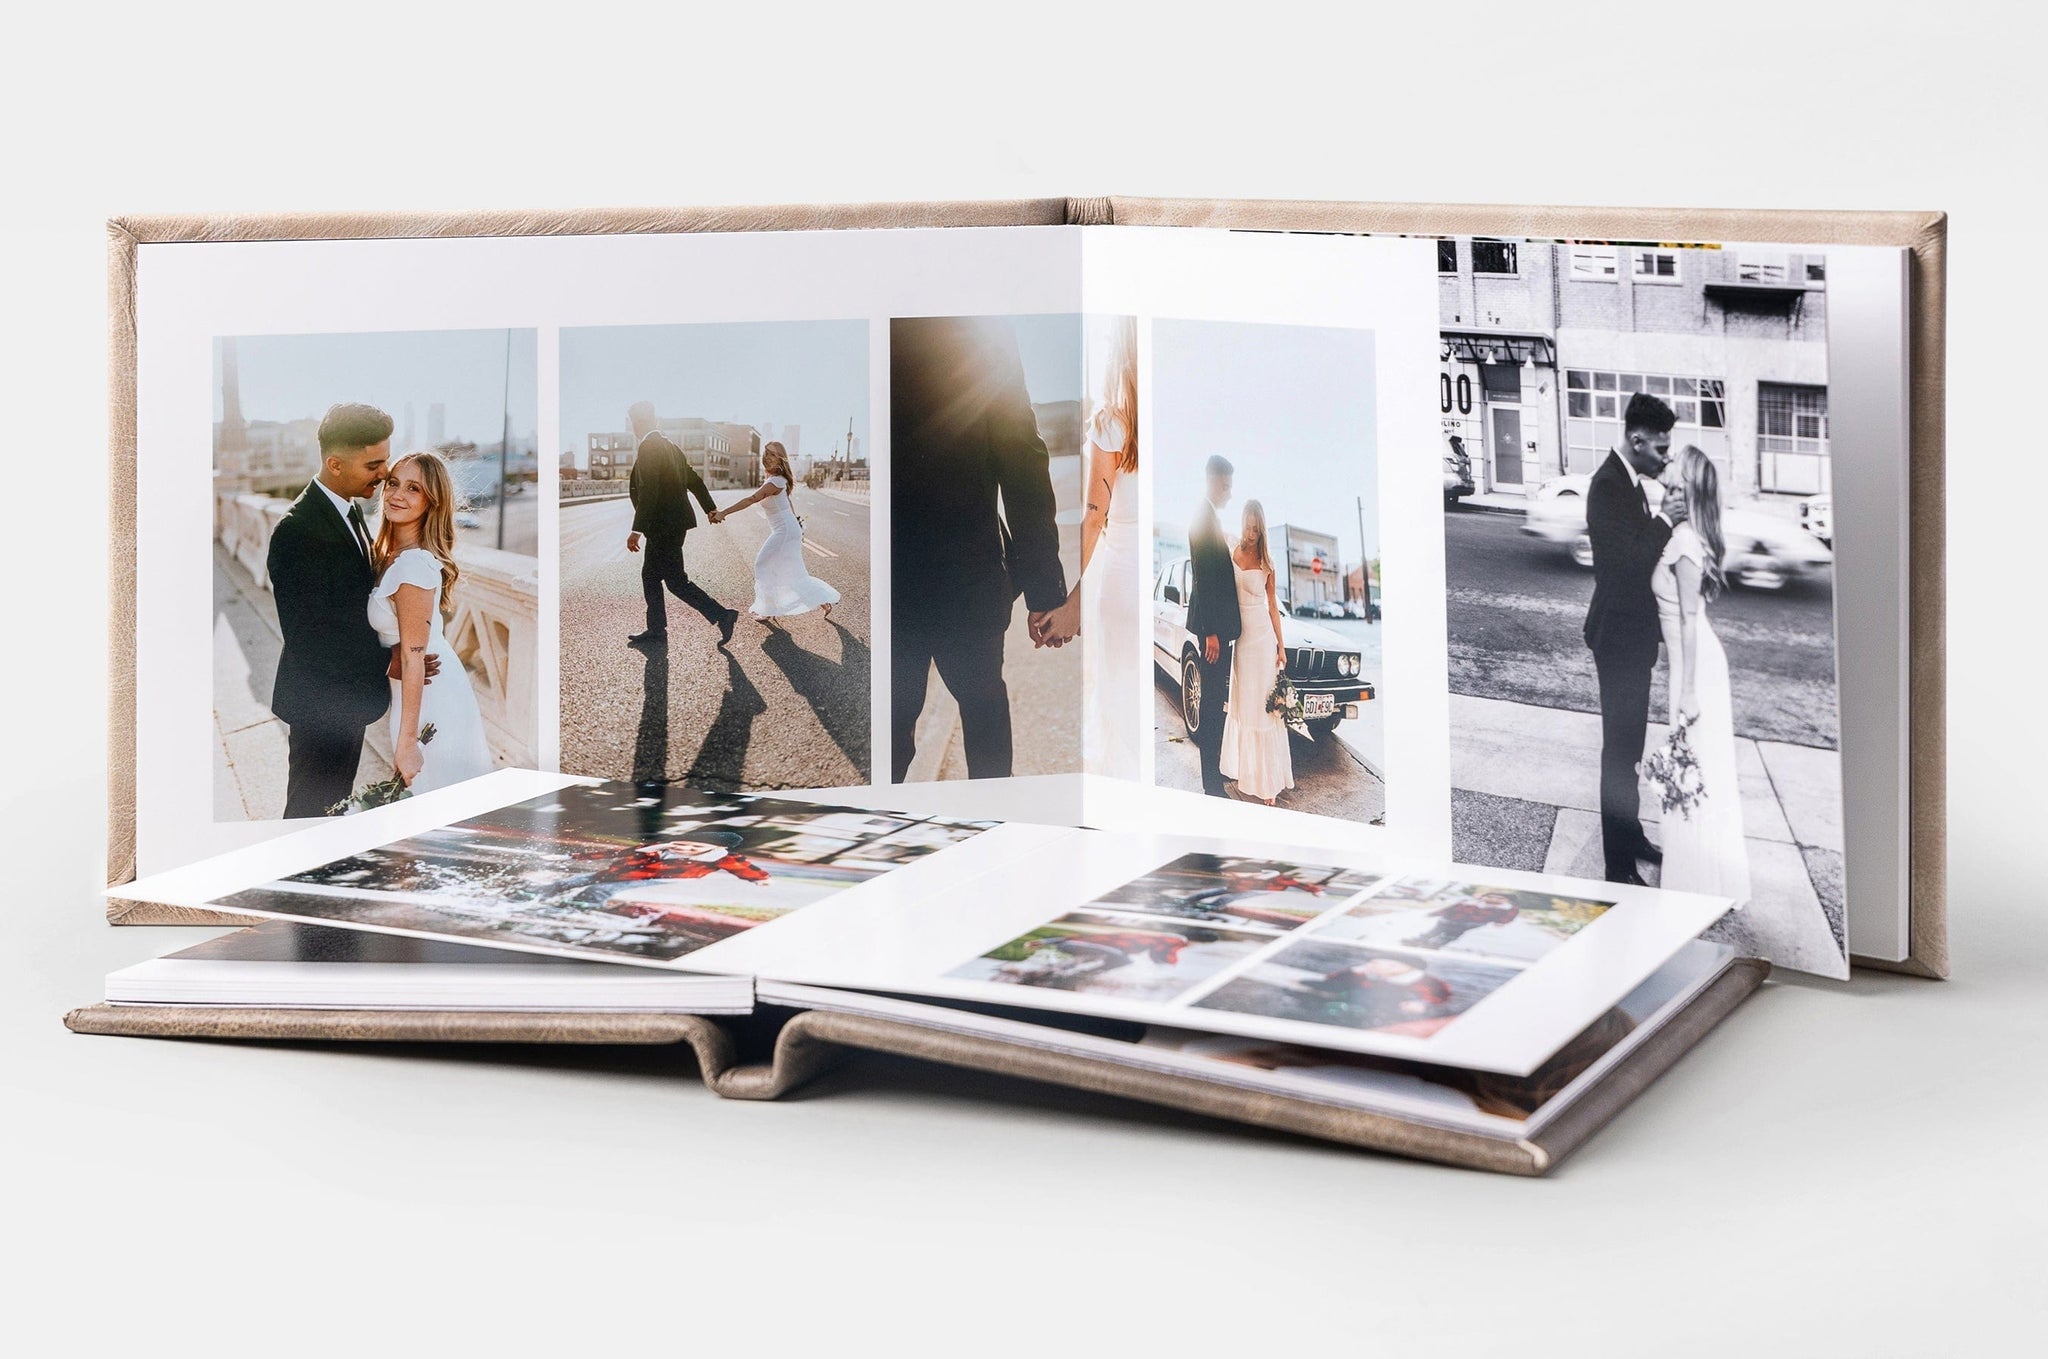 Two Album99s, one laid flat and the other standing behind it. The standing Album99 features wedding photos.